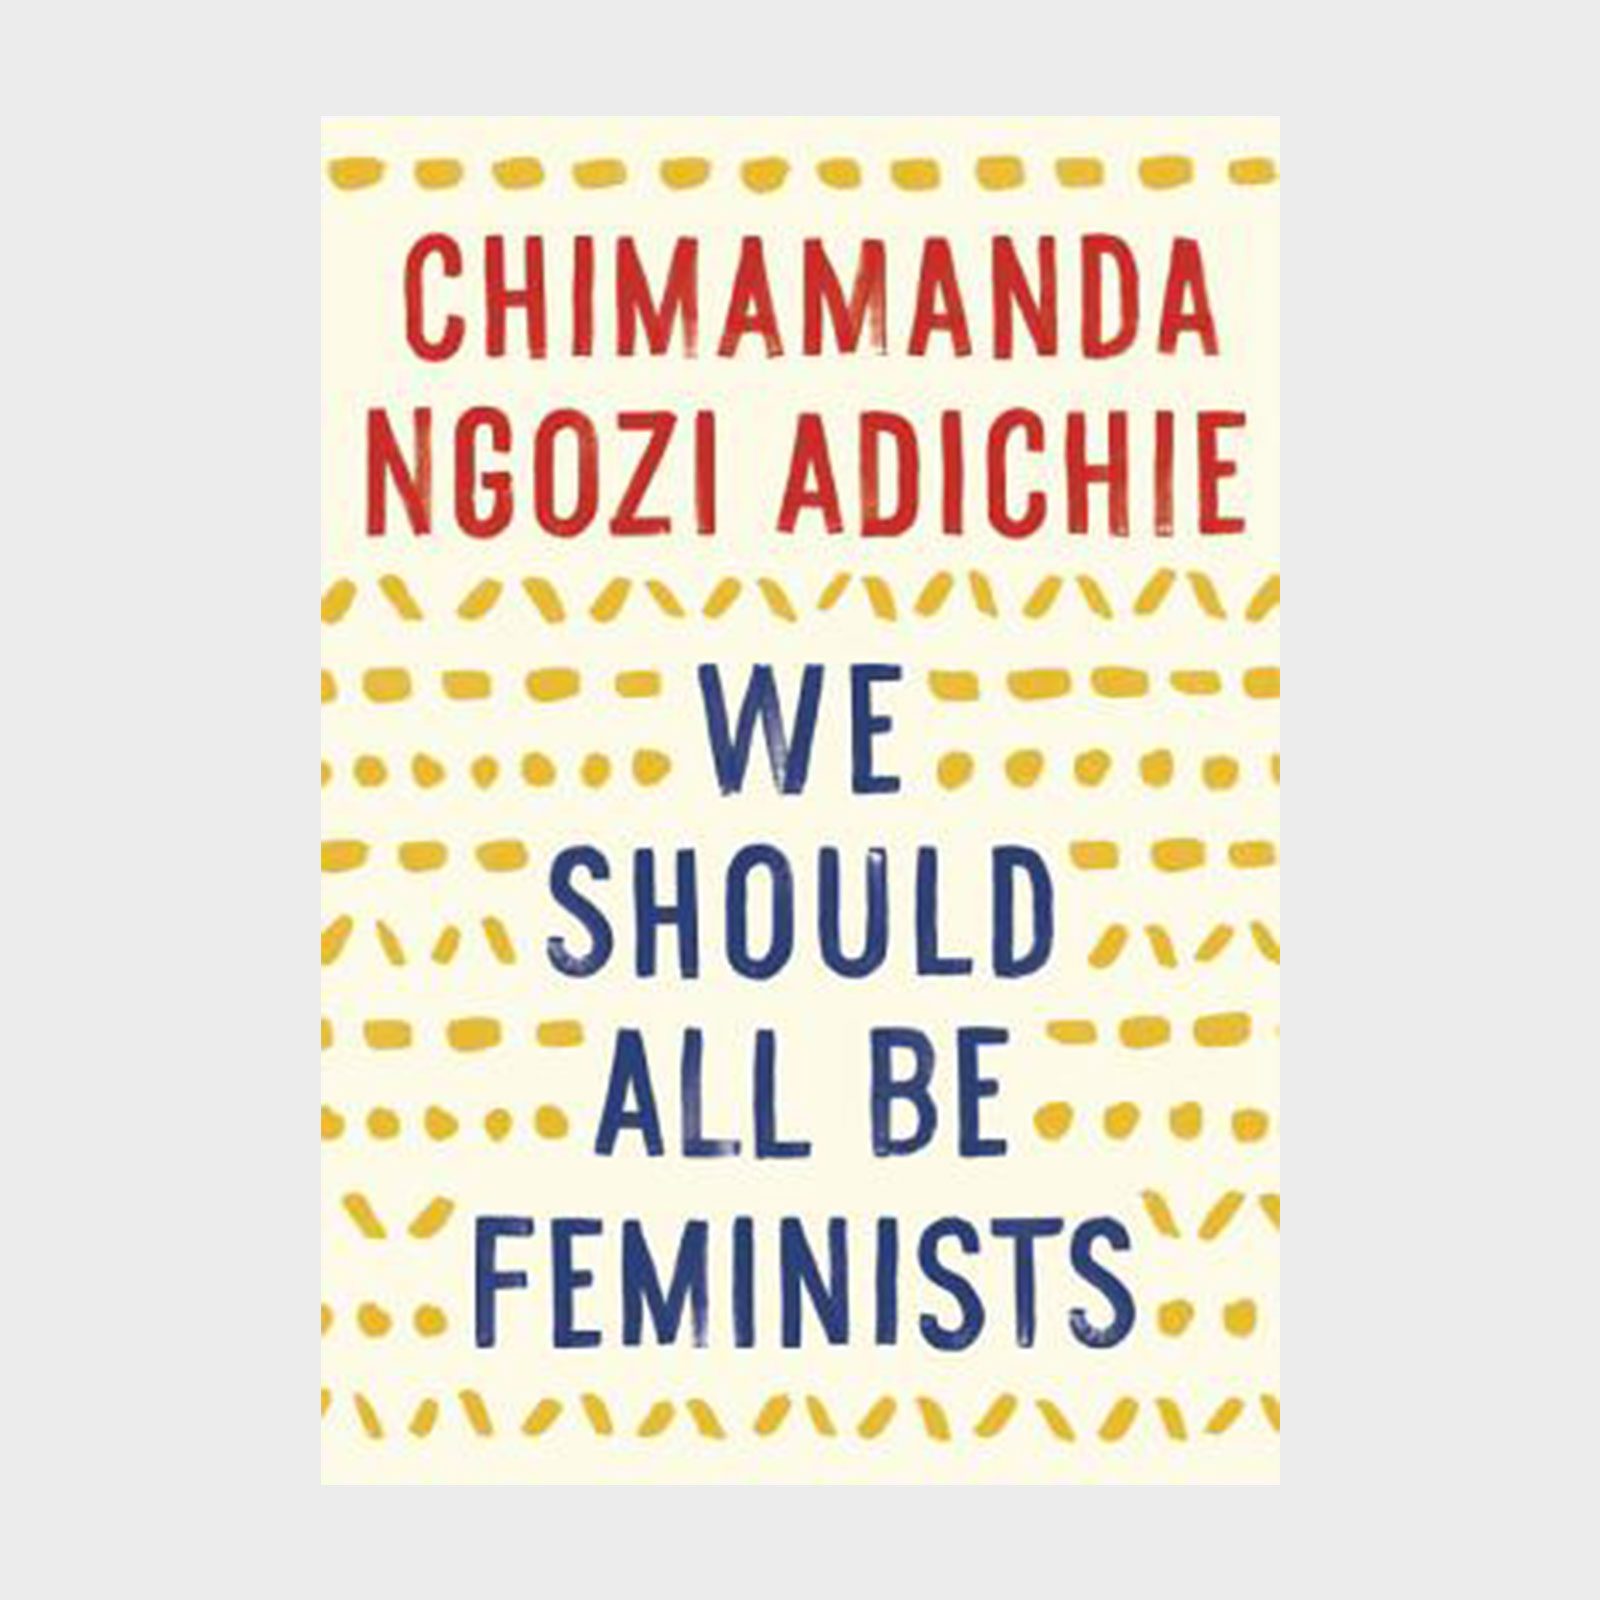 <p>In this short yet inspiring 2014 essay adapted from a Tedx Talk of the same name, Chimamanda Ngozi Adichie's <a href="https://bookshop.org/p/books/we-should-all-be-feminists-chimamanda-ngozi-adichie/8588269?ean=9781101911761" rel="noopener"><em>We Should All Be Feminists</em></a> explores what it means to be a woman in the 21st century and draws upon her own experiences to provide refreshing, motivating insights on the modern definition of feminism.</p> <p class="listicle-page__cta-button-shop"><a class="shop-btn" href="https://bookshop.org/p/books/we-should-all-be-feminists-chimamanda-ngozi-adichie/8588269?ean=9781101911761">Shop Now</a></p>